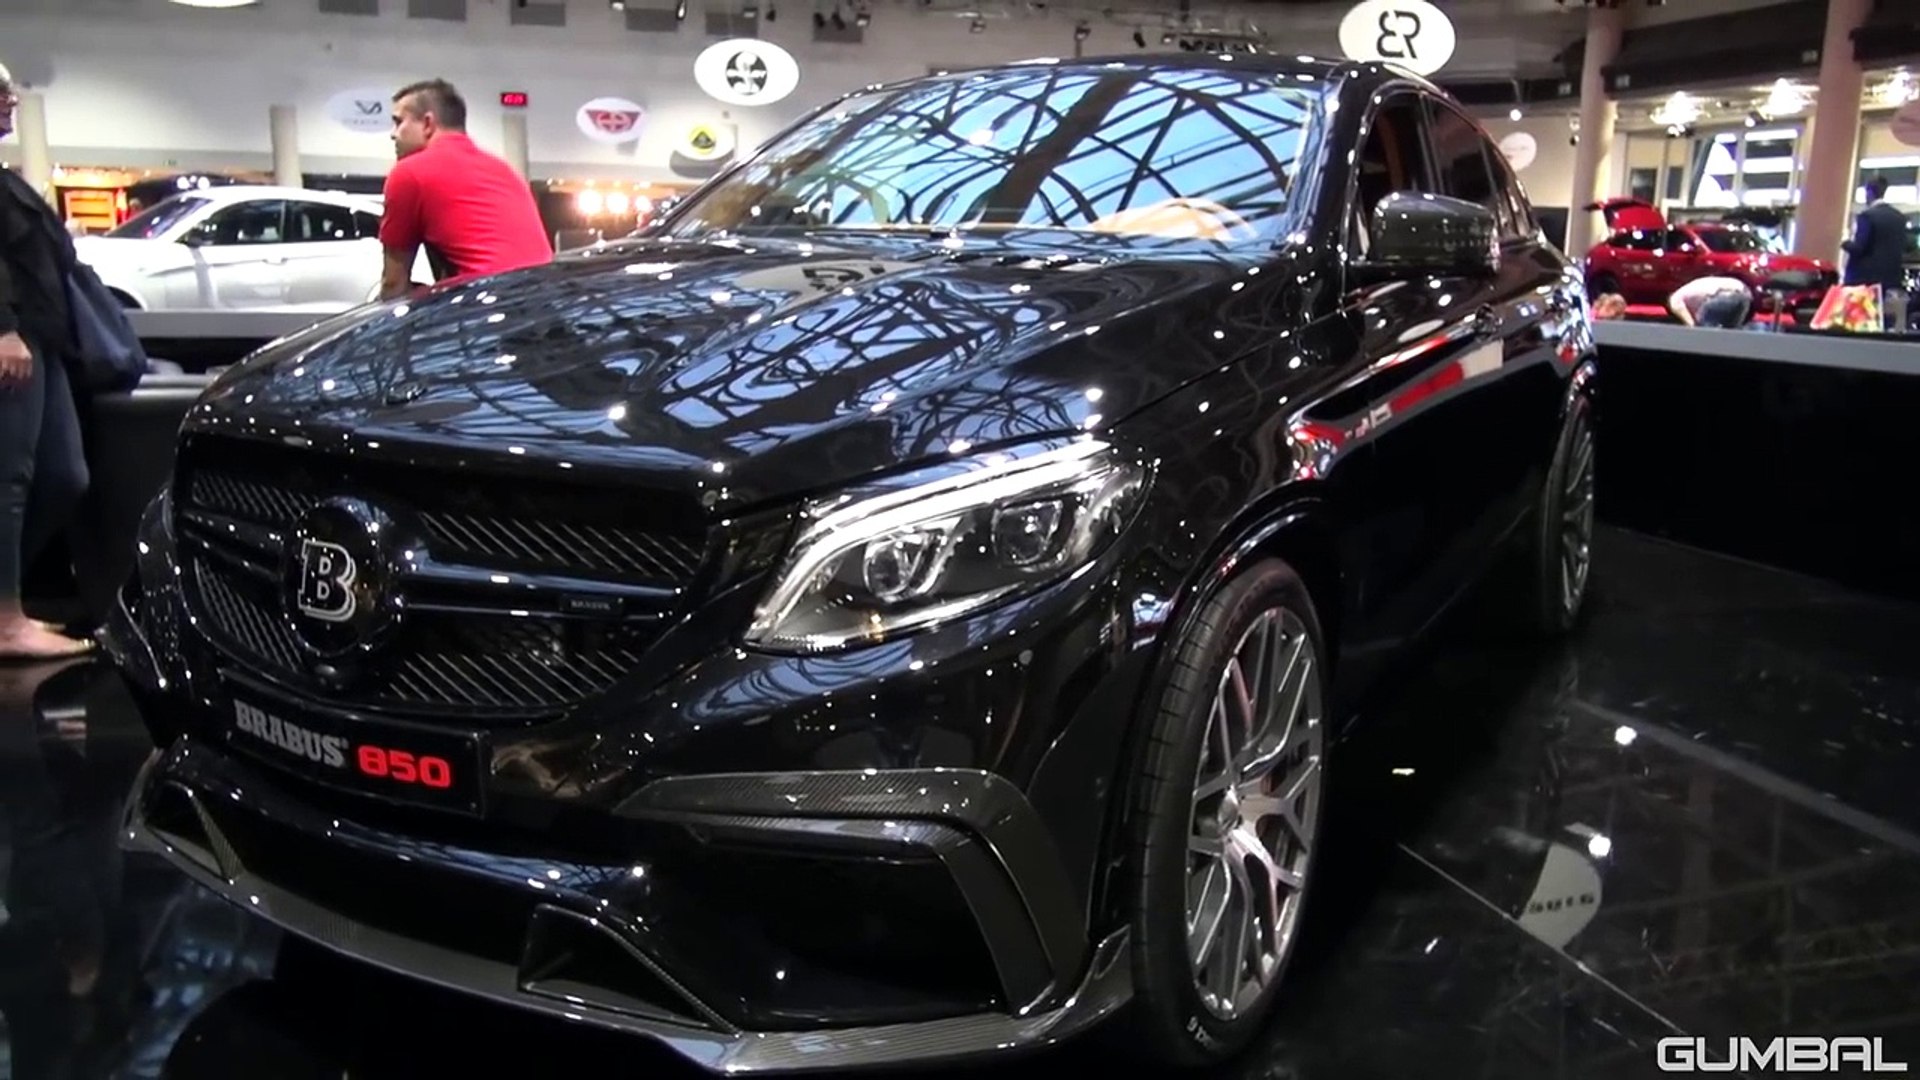 Brabus Gle 850 6 0 Biturbo Coupe Start Up Overview Video Dailymotion